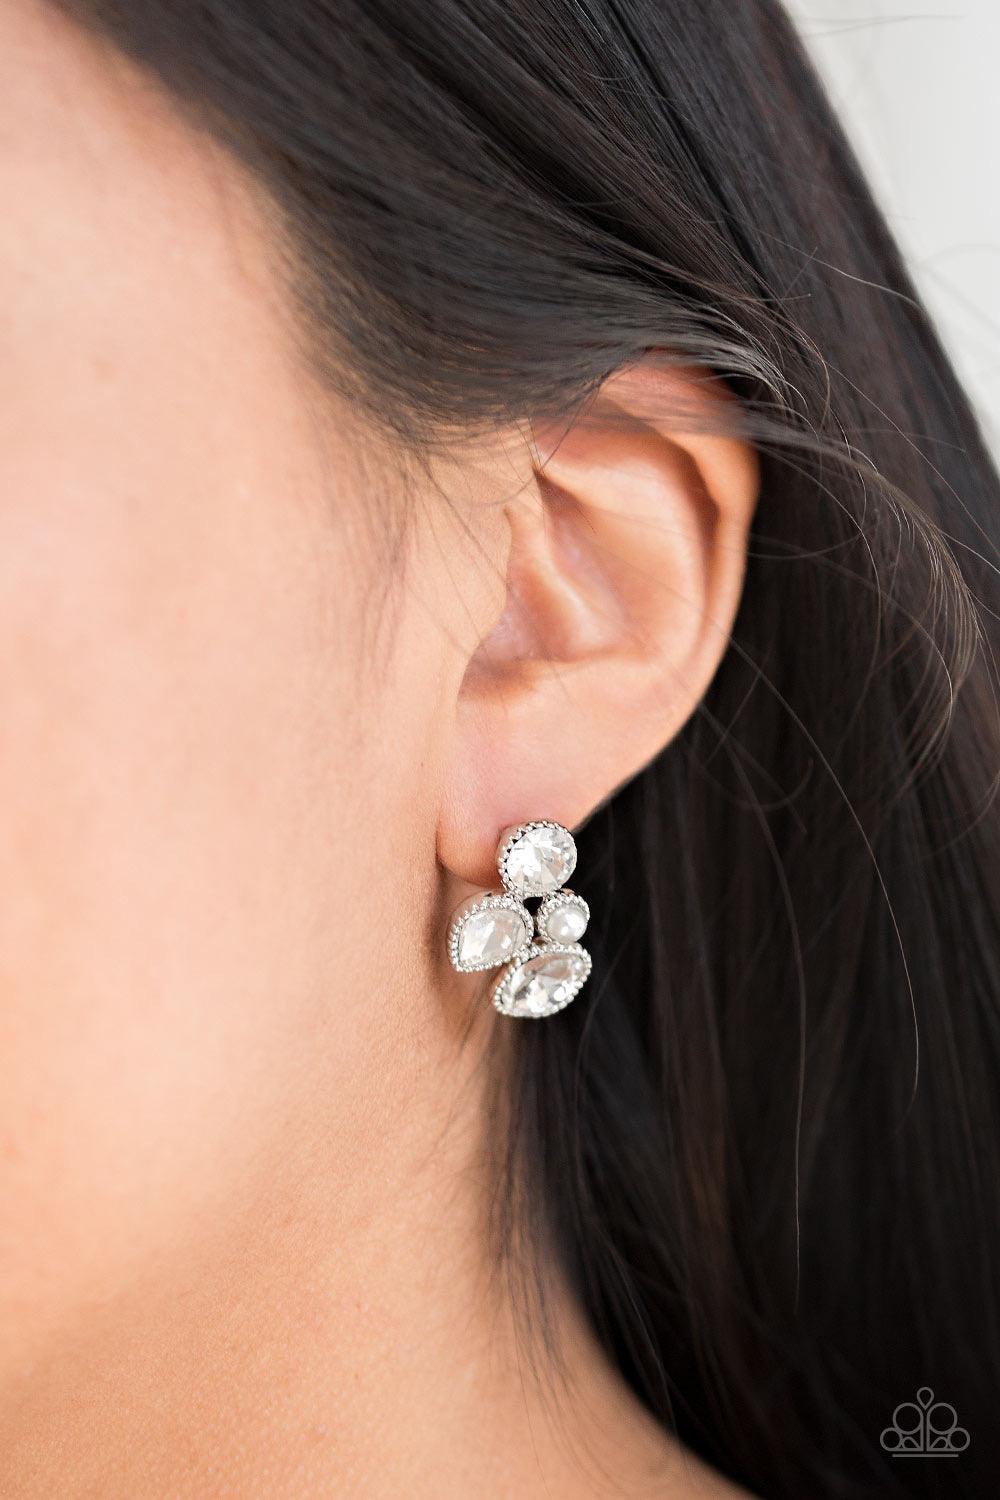 Paparazzi Accessories Super Superstar - White Infused with a dainty white pearl, mismatched white rhinestones coalesce into a glittery frame. Earring attaches to a standard post fitting. Jewelry